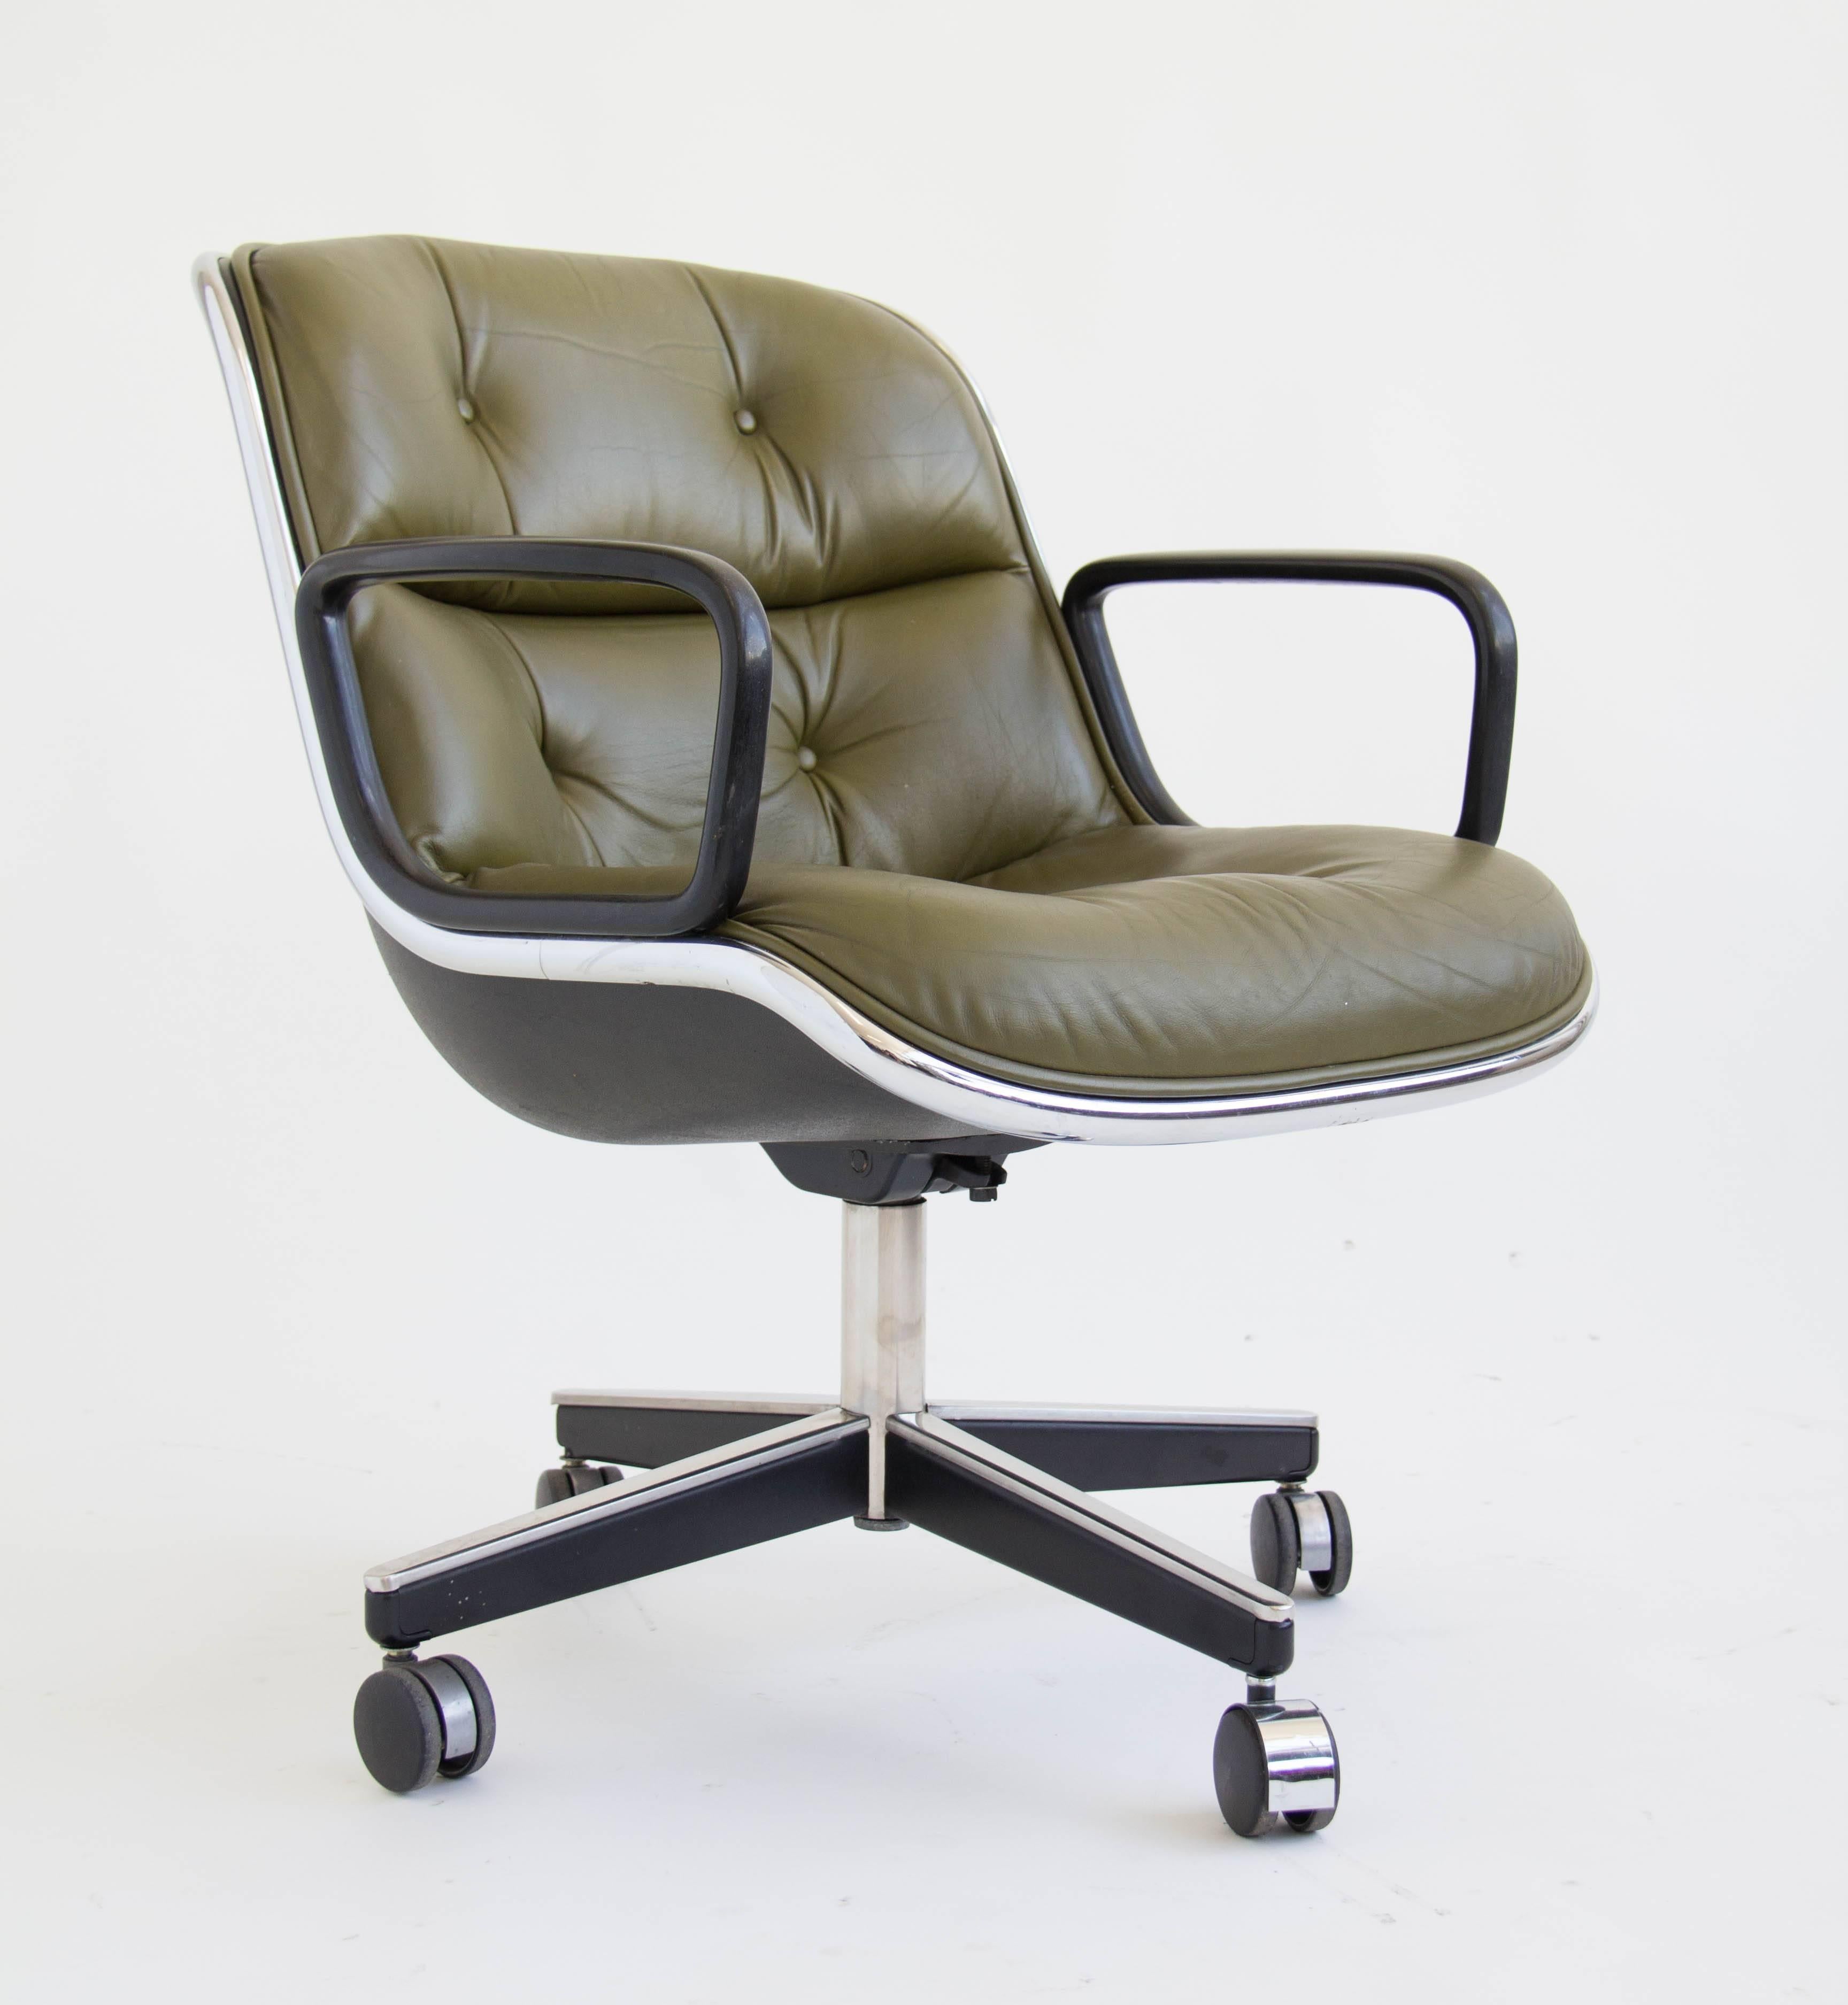 
Designed by Charles Pollock for Knoll in 1963, this leather desk chair features a chromed aluminum band around the frame, a signature design element providing both structural support and a cohesive appearance. This example is upholstered in tufted